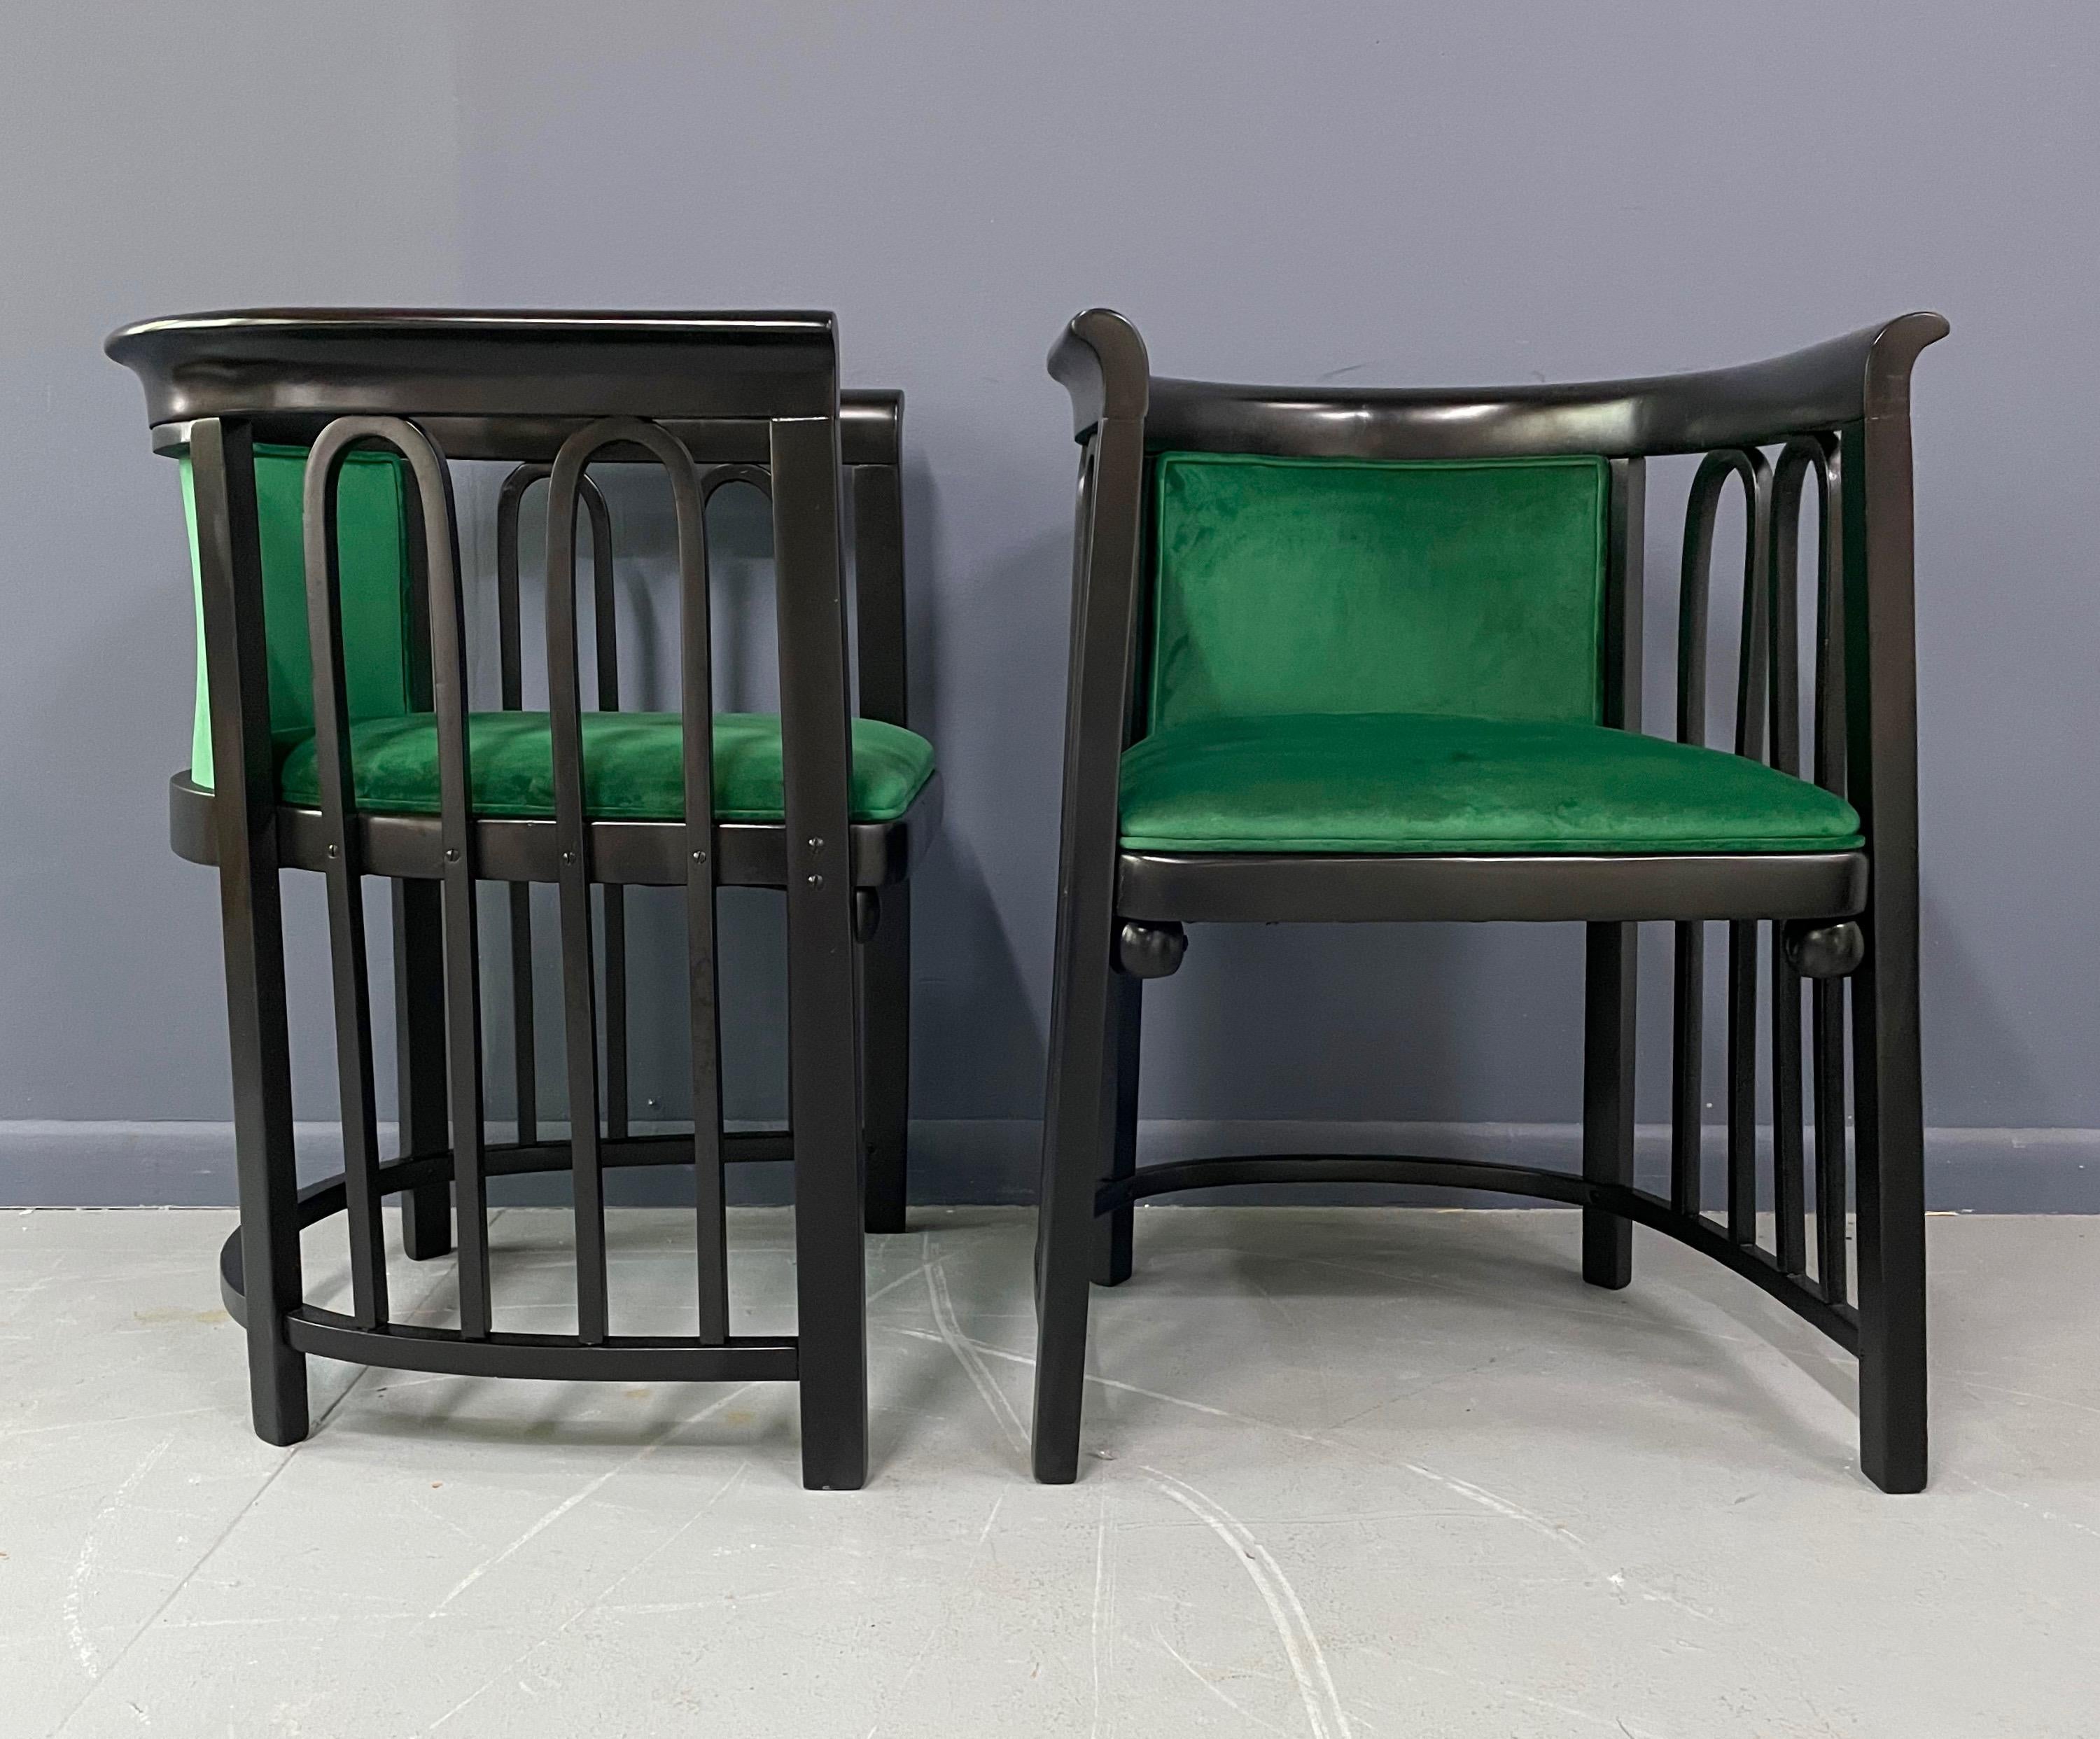 20th Century Josef Hoffman Pair of Secessionist Bentwood Barrel Back Arm Chairs for J&J Kohn